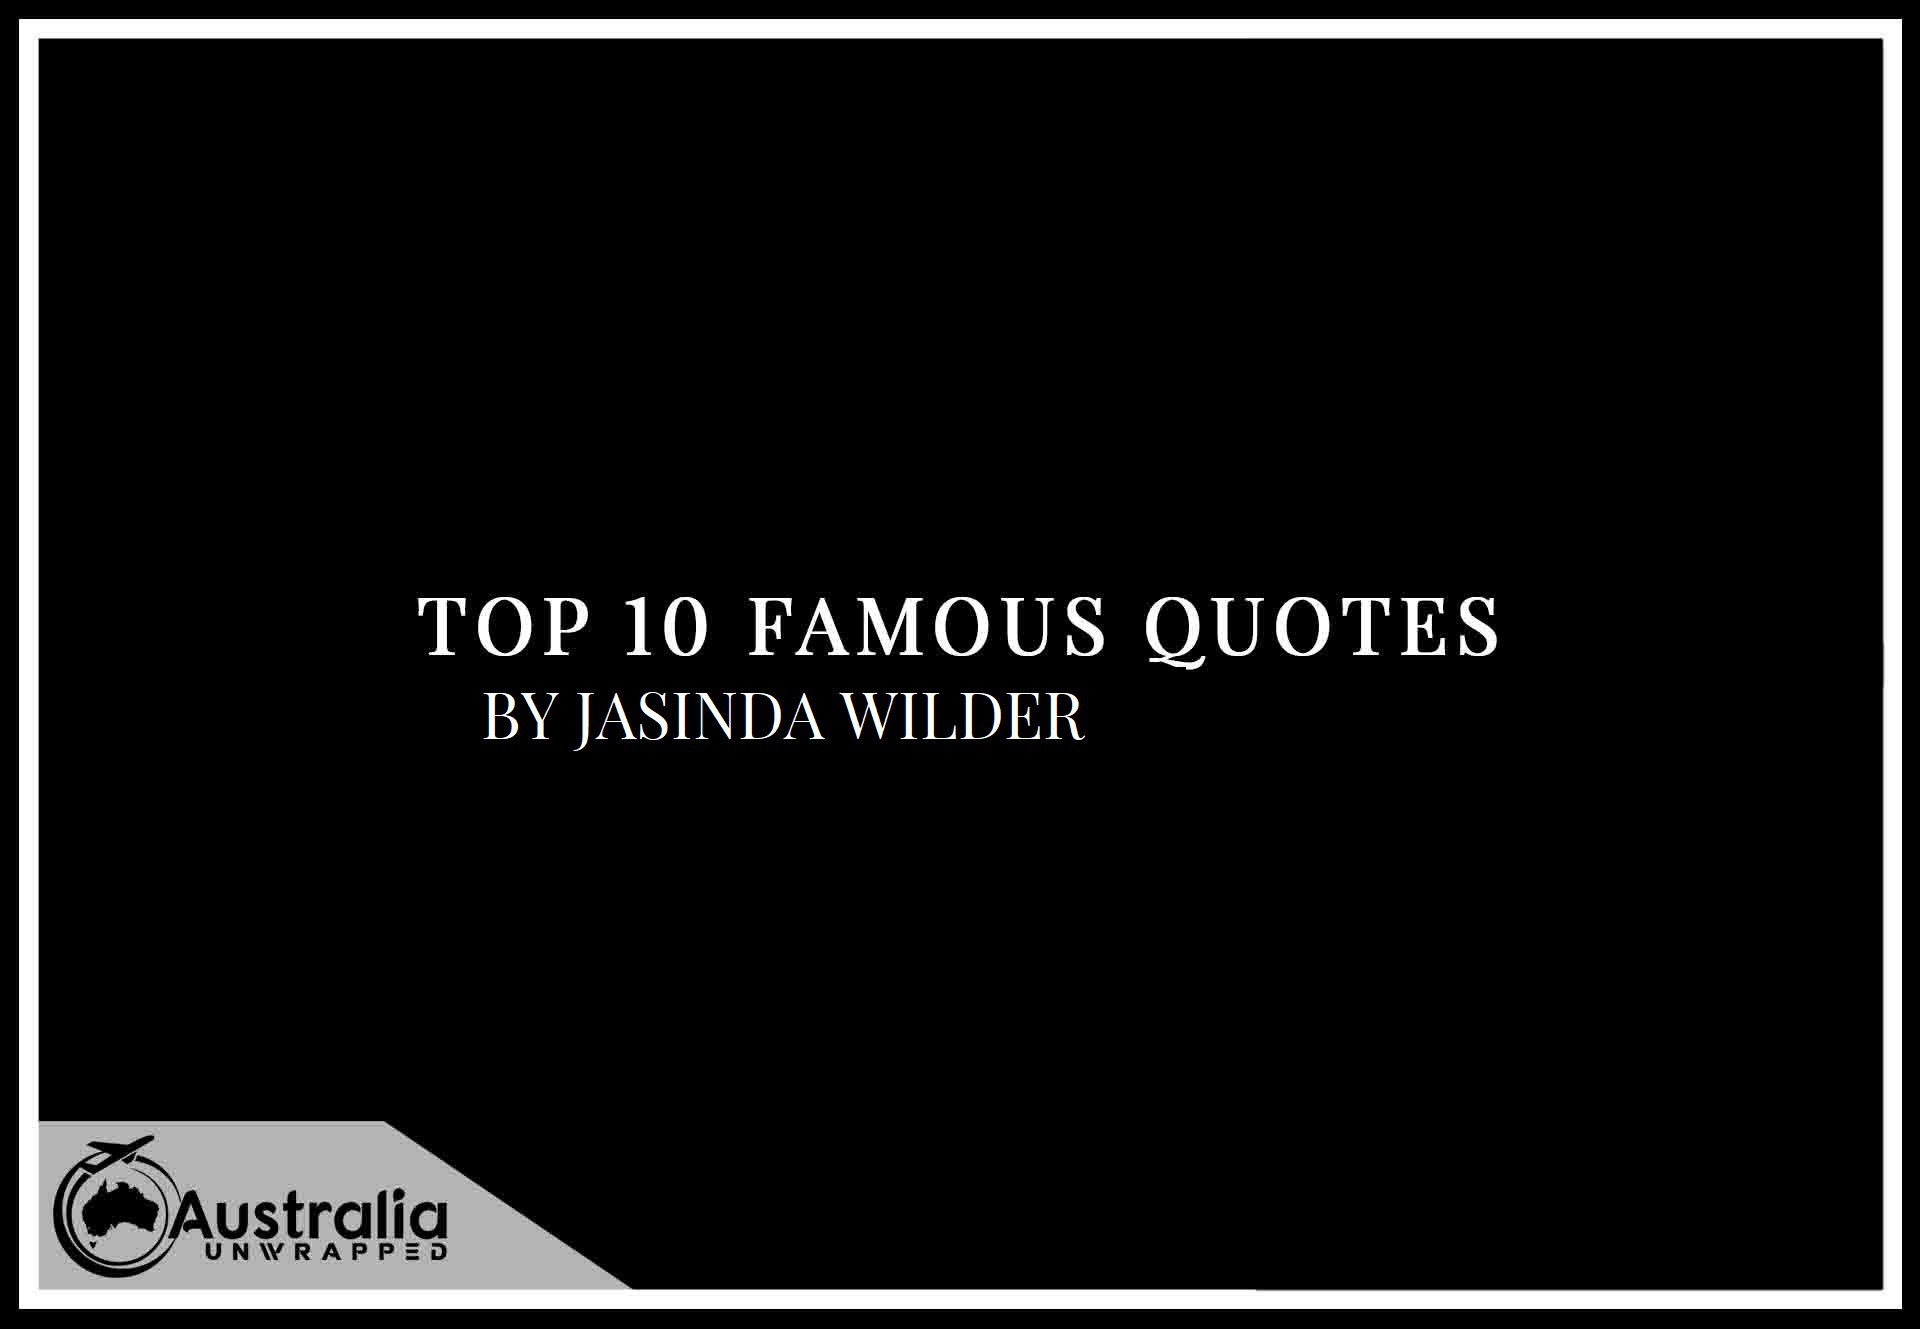 Top 10 Famous Quotes by Author Jasinda Wilder